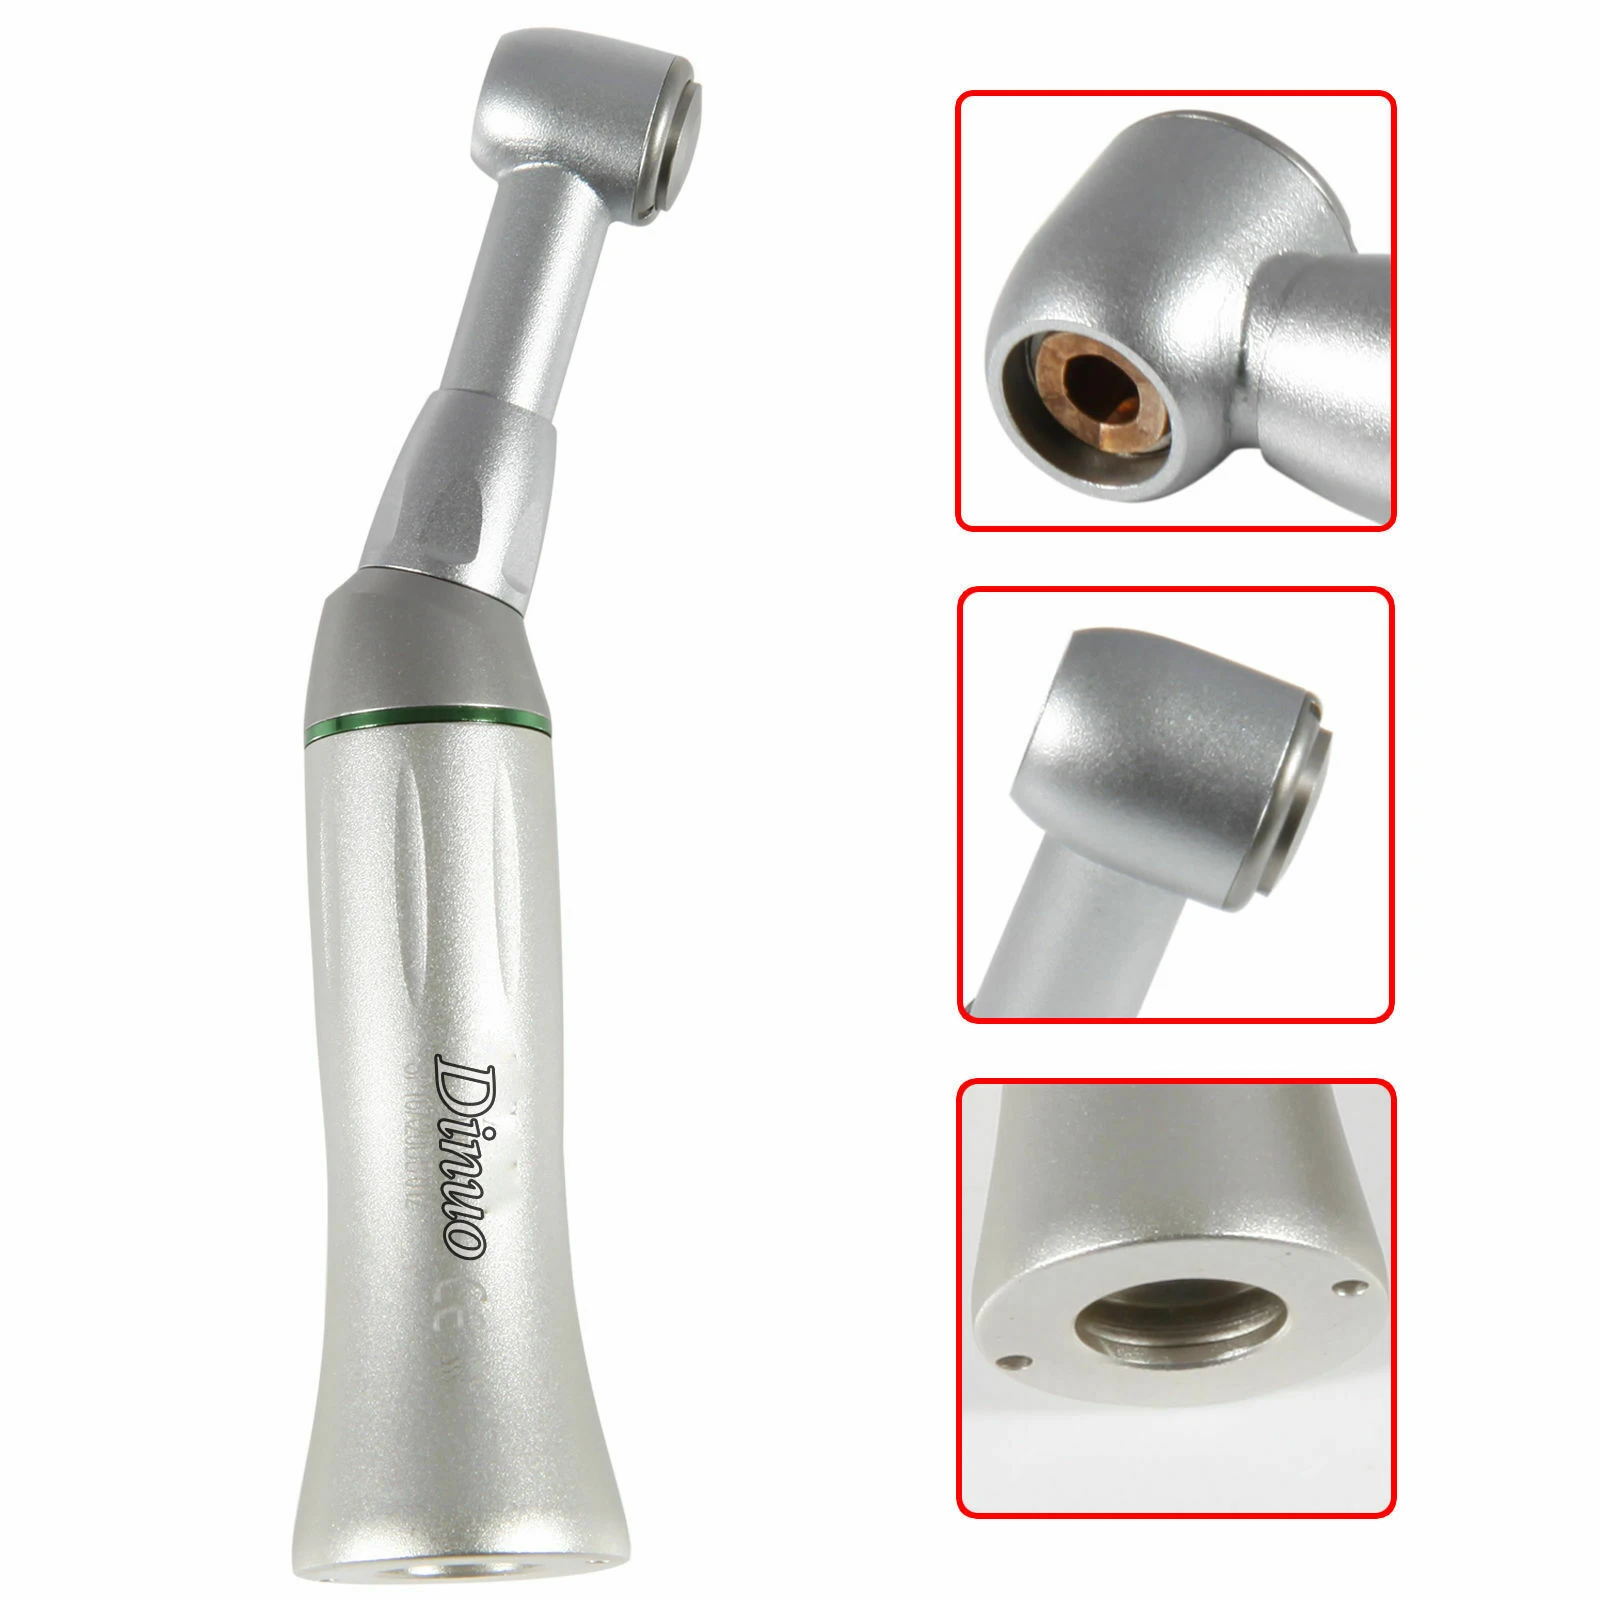 FREE SHIPPING Dental 10:1 Contra Angle Wrench Type Low Speed Handpiece Latch Air Turbine Dental Handpiece For Dentistry Tools